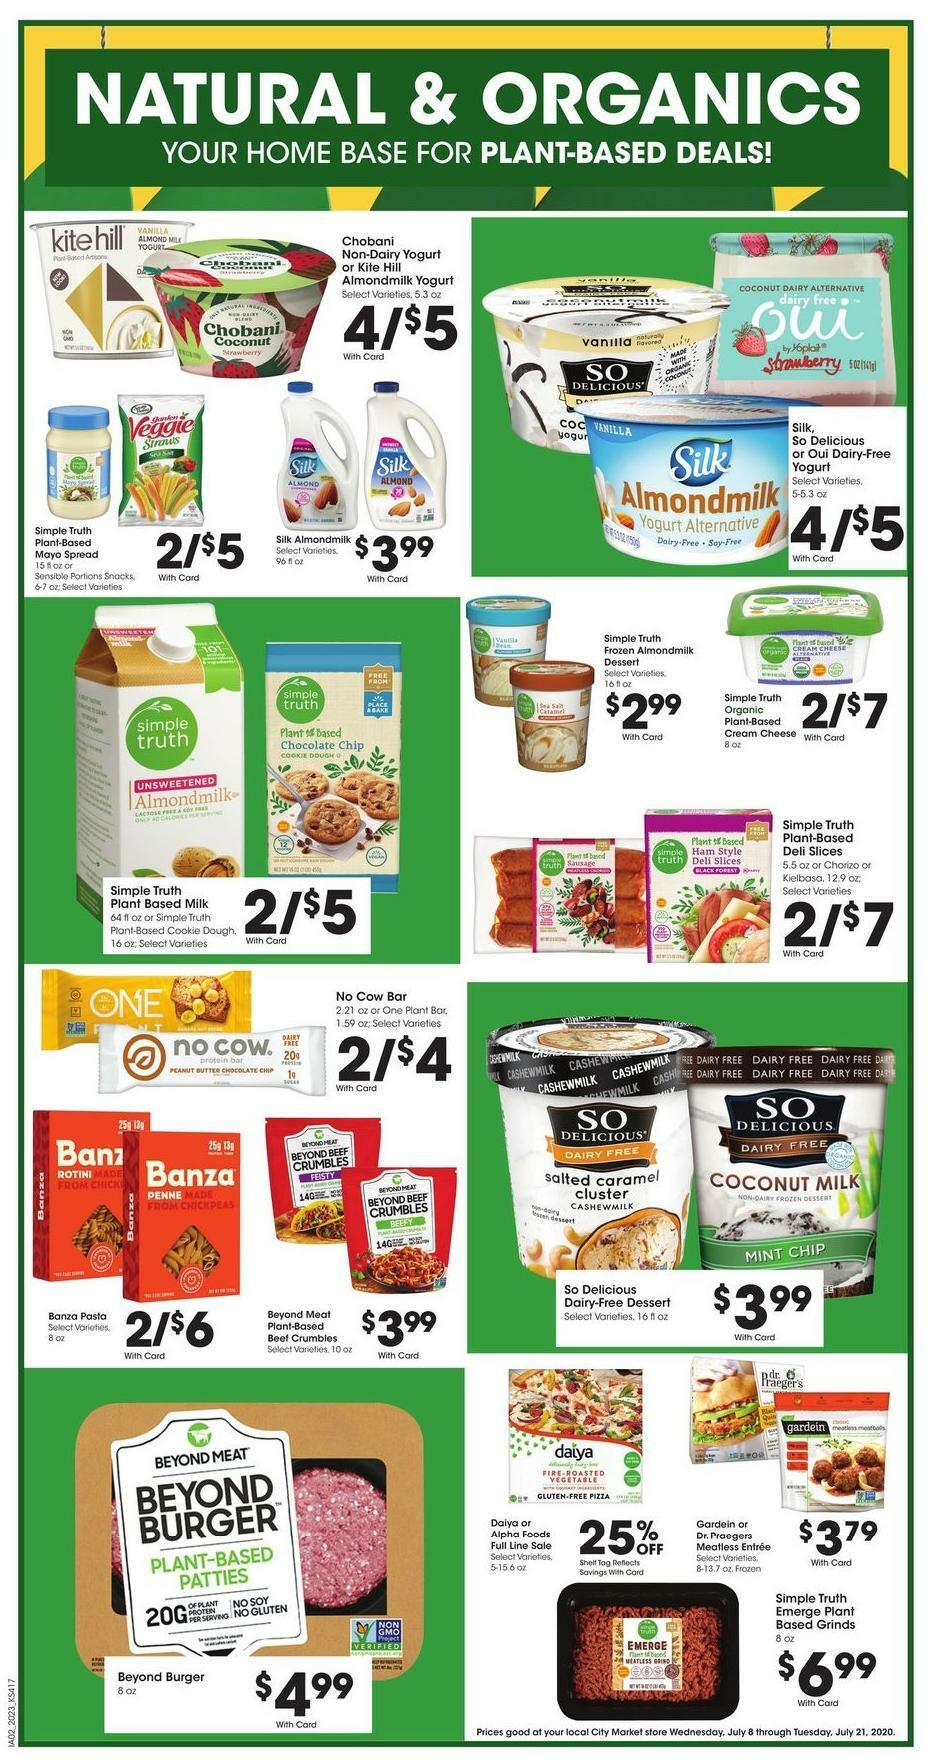 City Market Weekly Ad from July 15